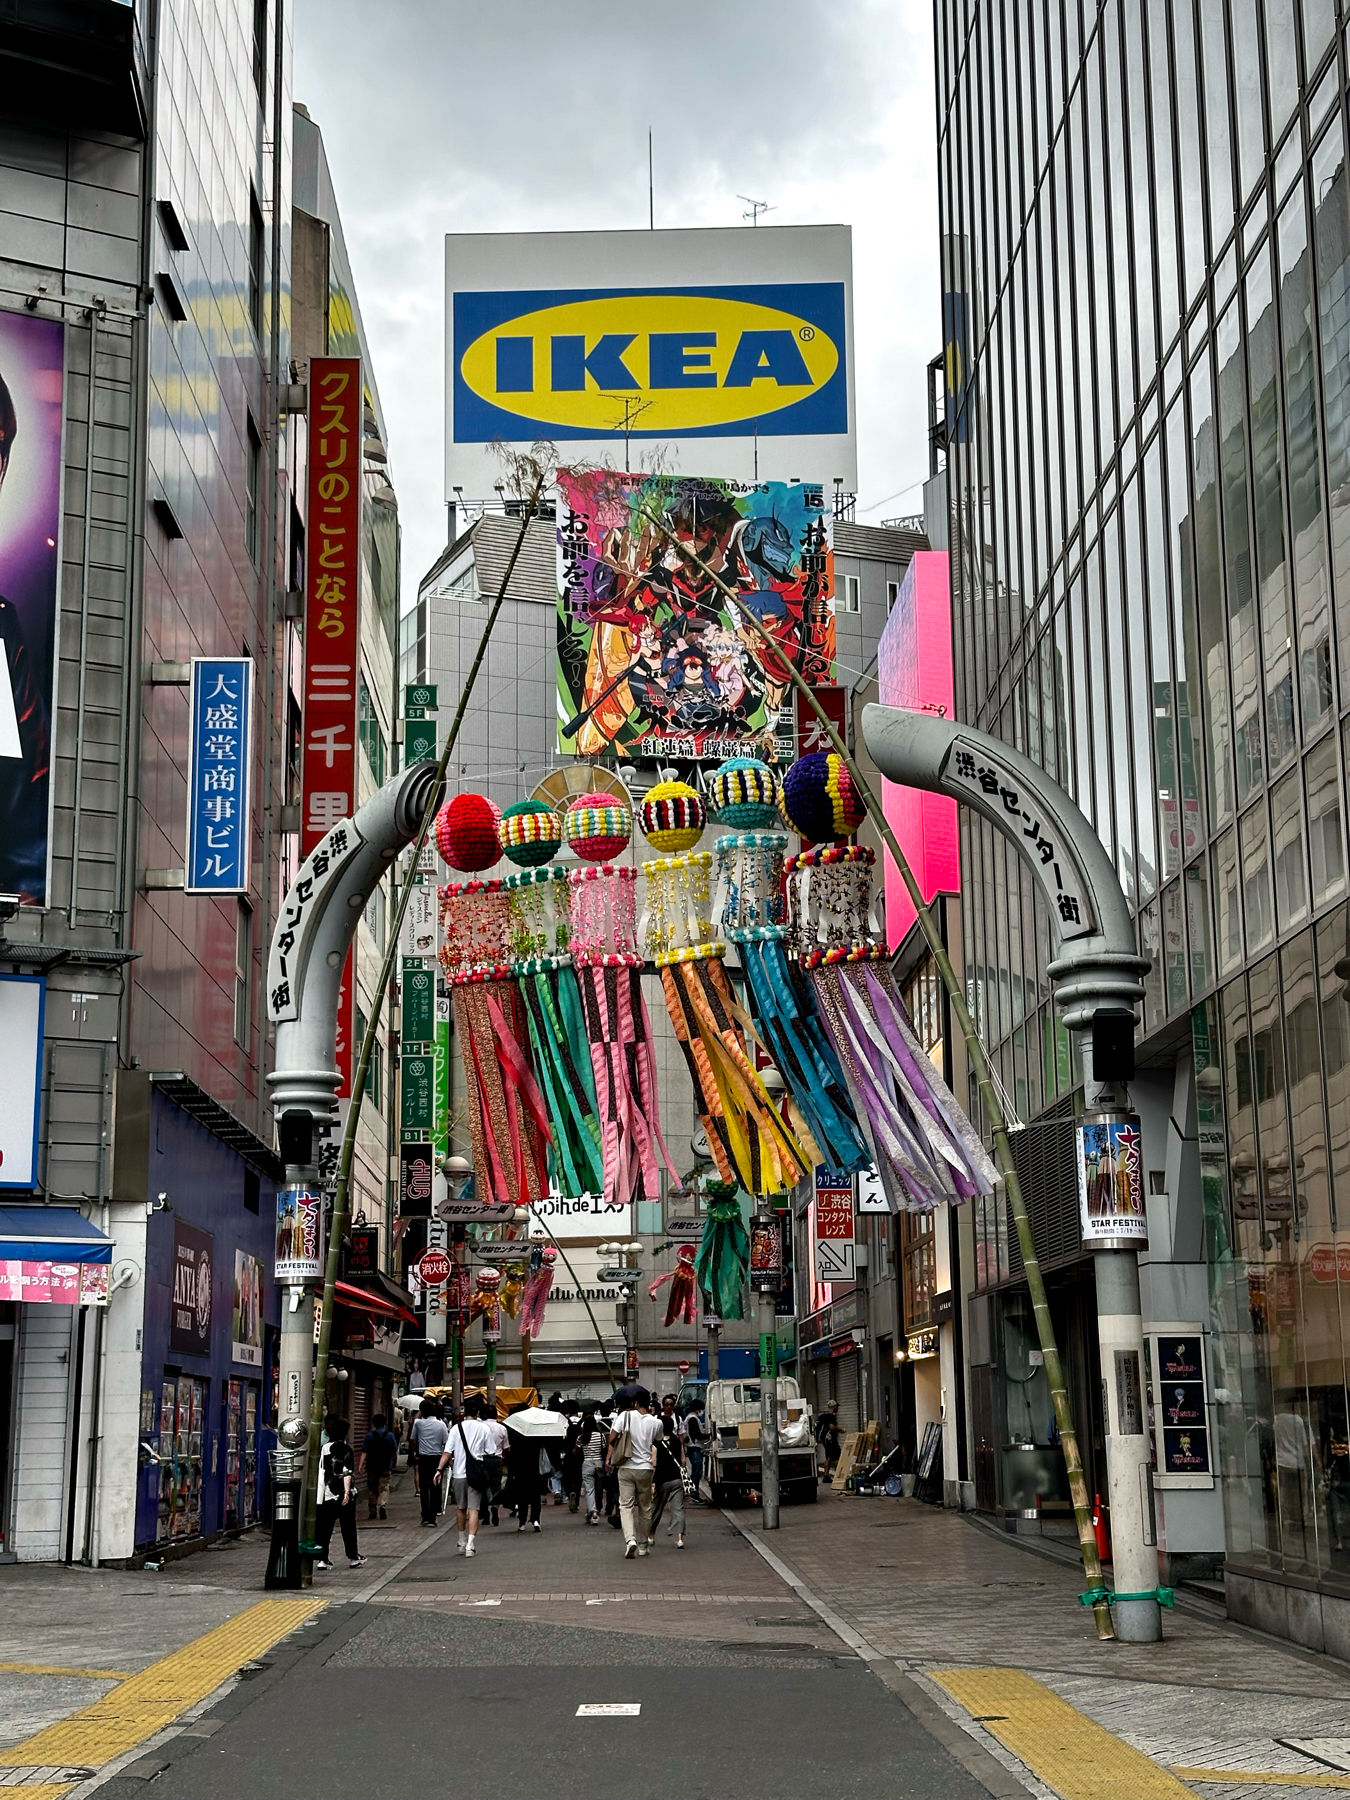 The entrance to basketball street in Shibuya. Colourful ribbon streamers welcome you to to the neighbourhood